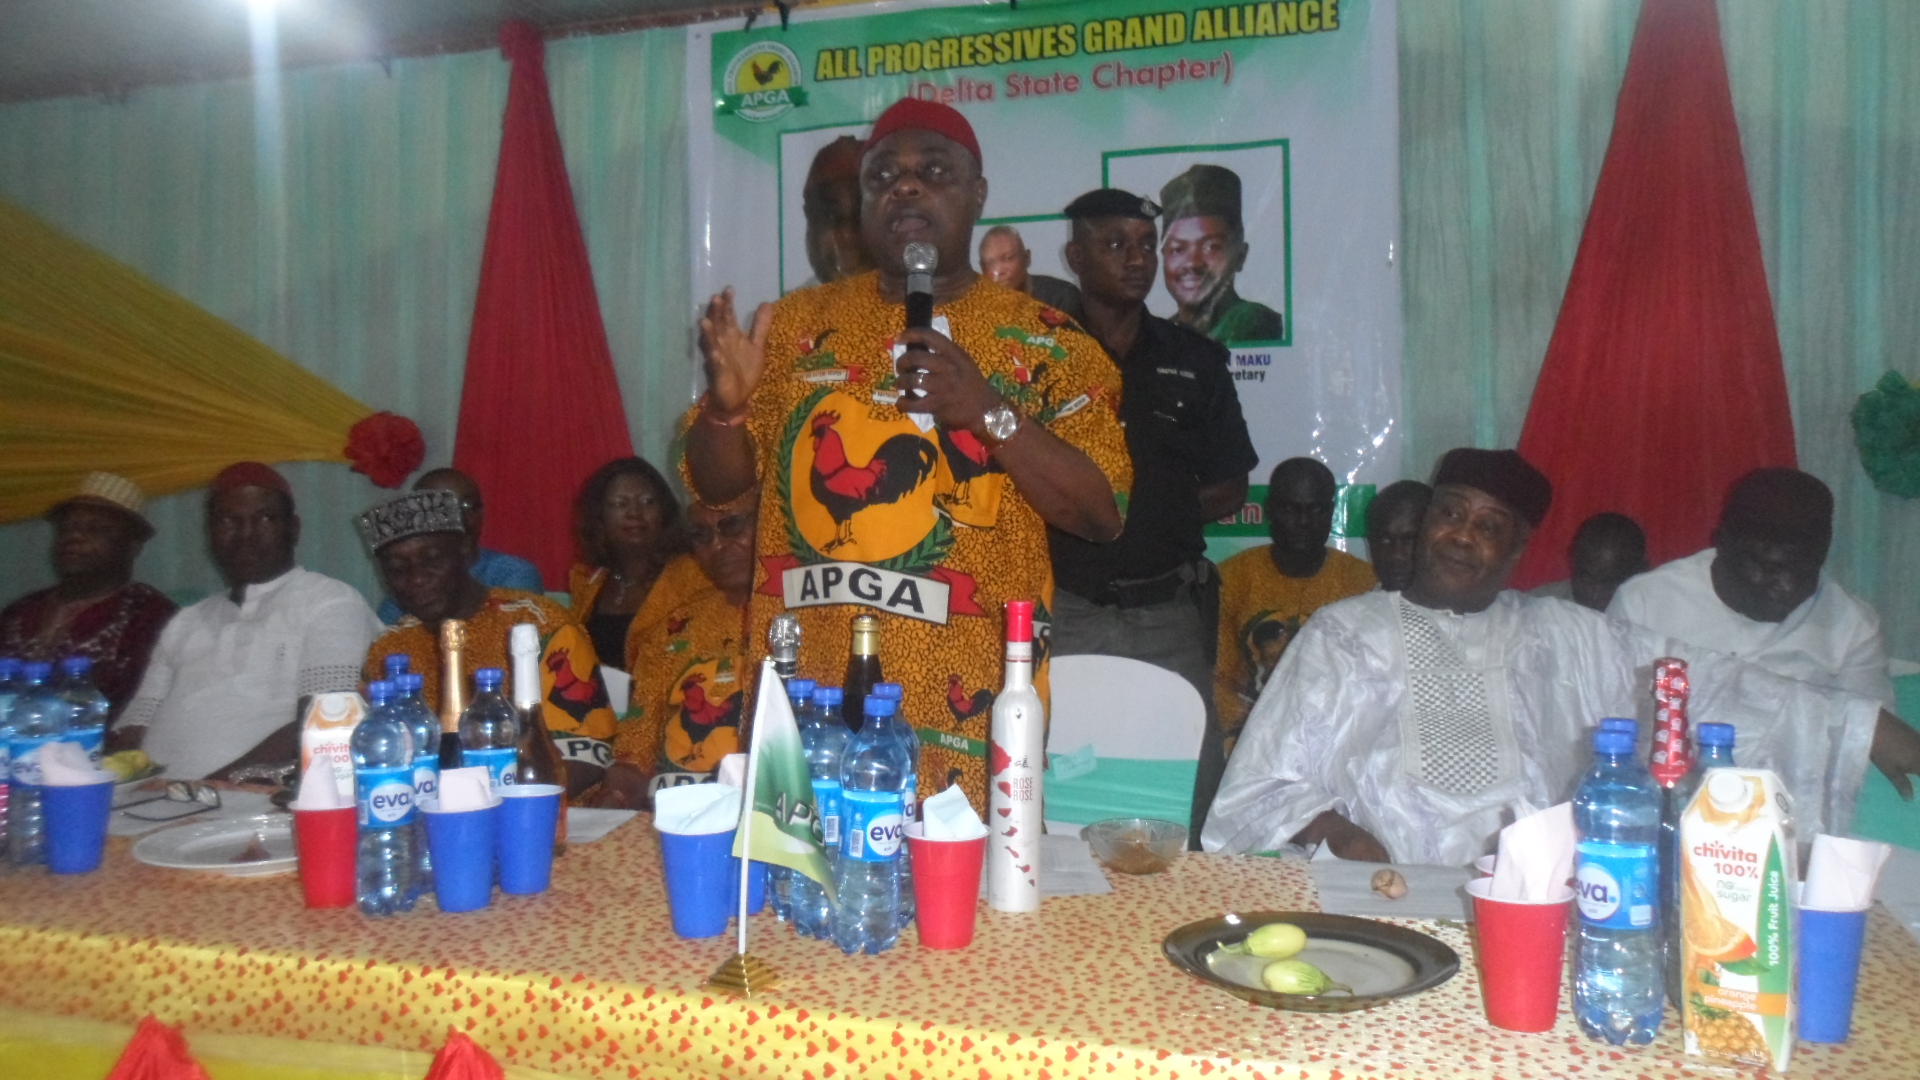 The national chairman of APGA, Chief Dr. Victor Ikechukwu Oye, addressing party faithful at the calendar lunch in Asaba, Delta State.